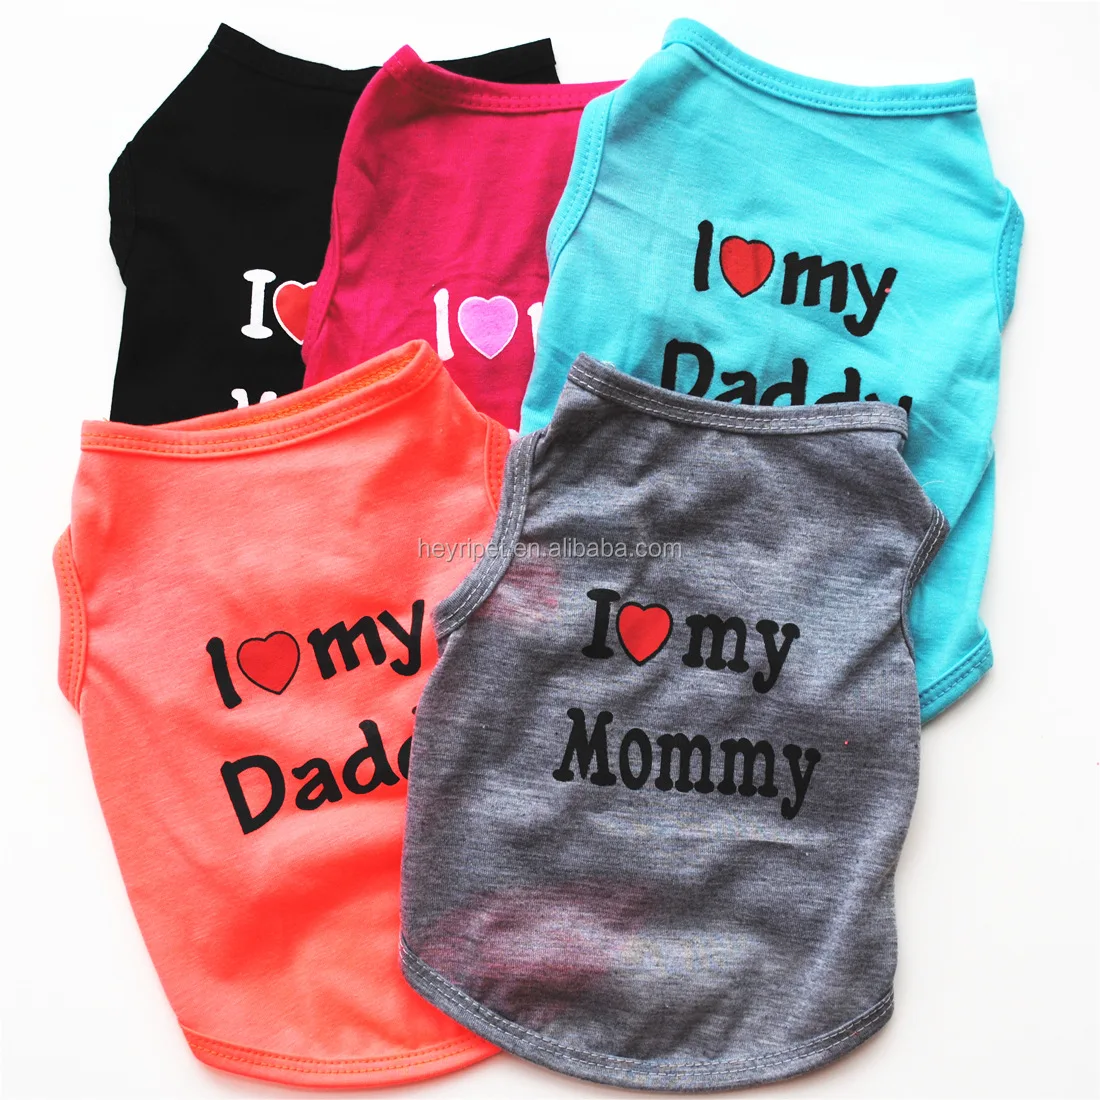 Pet Dog Puppy Cat Letters I love My Mommy Printed Cotton Shirt Vest Tops Clothes